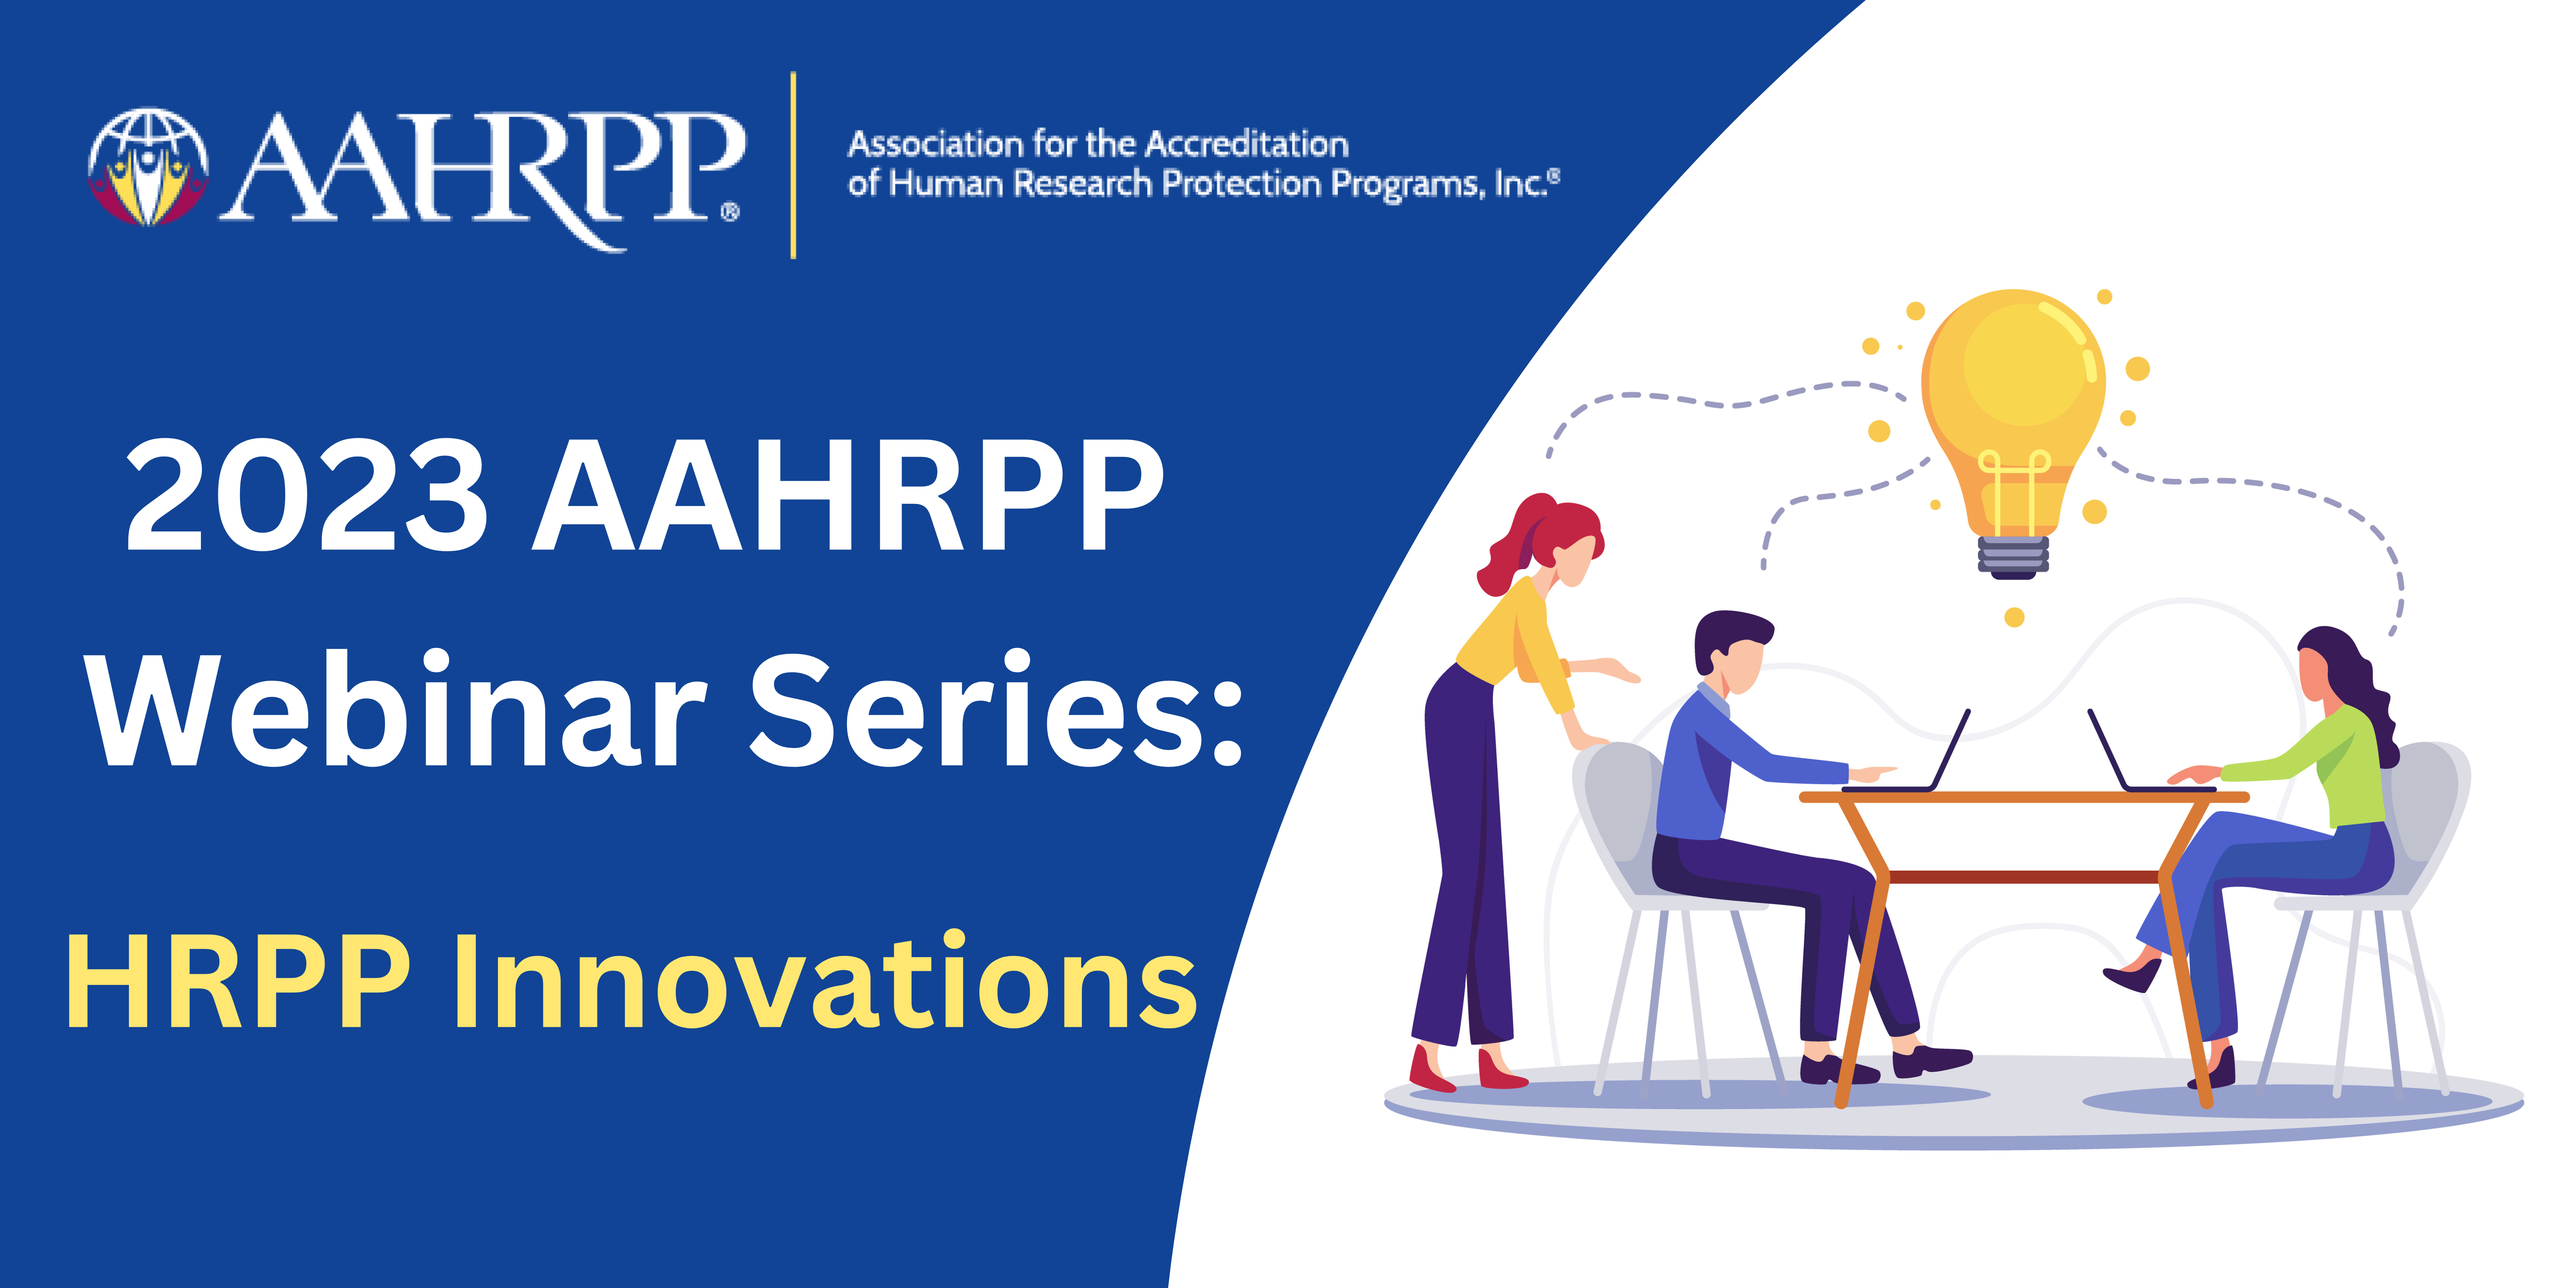 Image for Innovative Practices by AAHRPP-Accredited Organizations: Responding to the Concerns of Research Participants (Standard I.4)